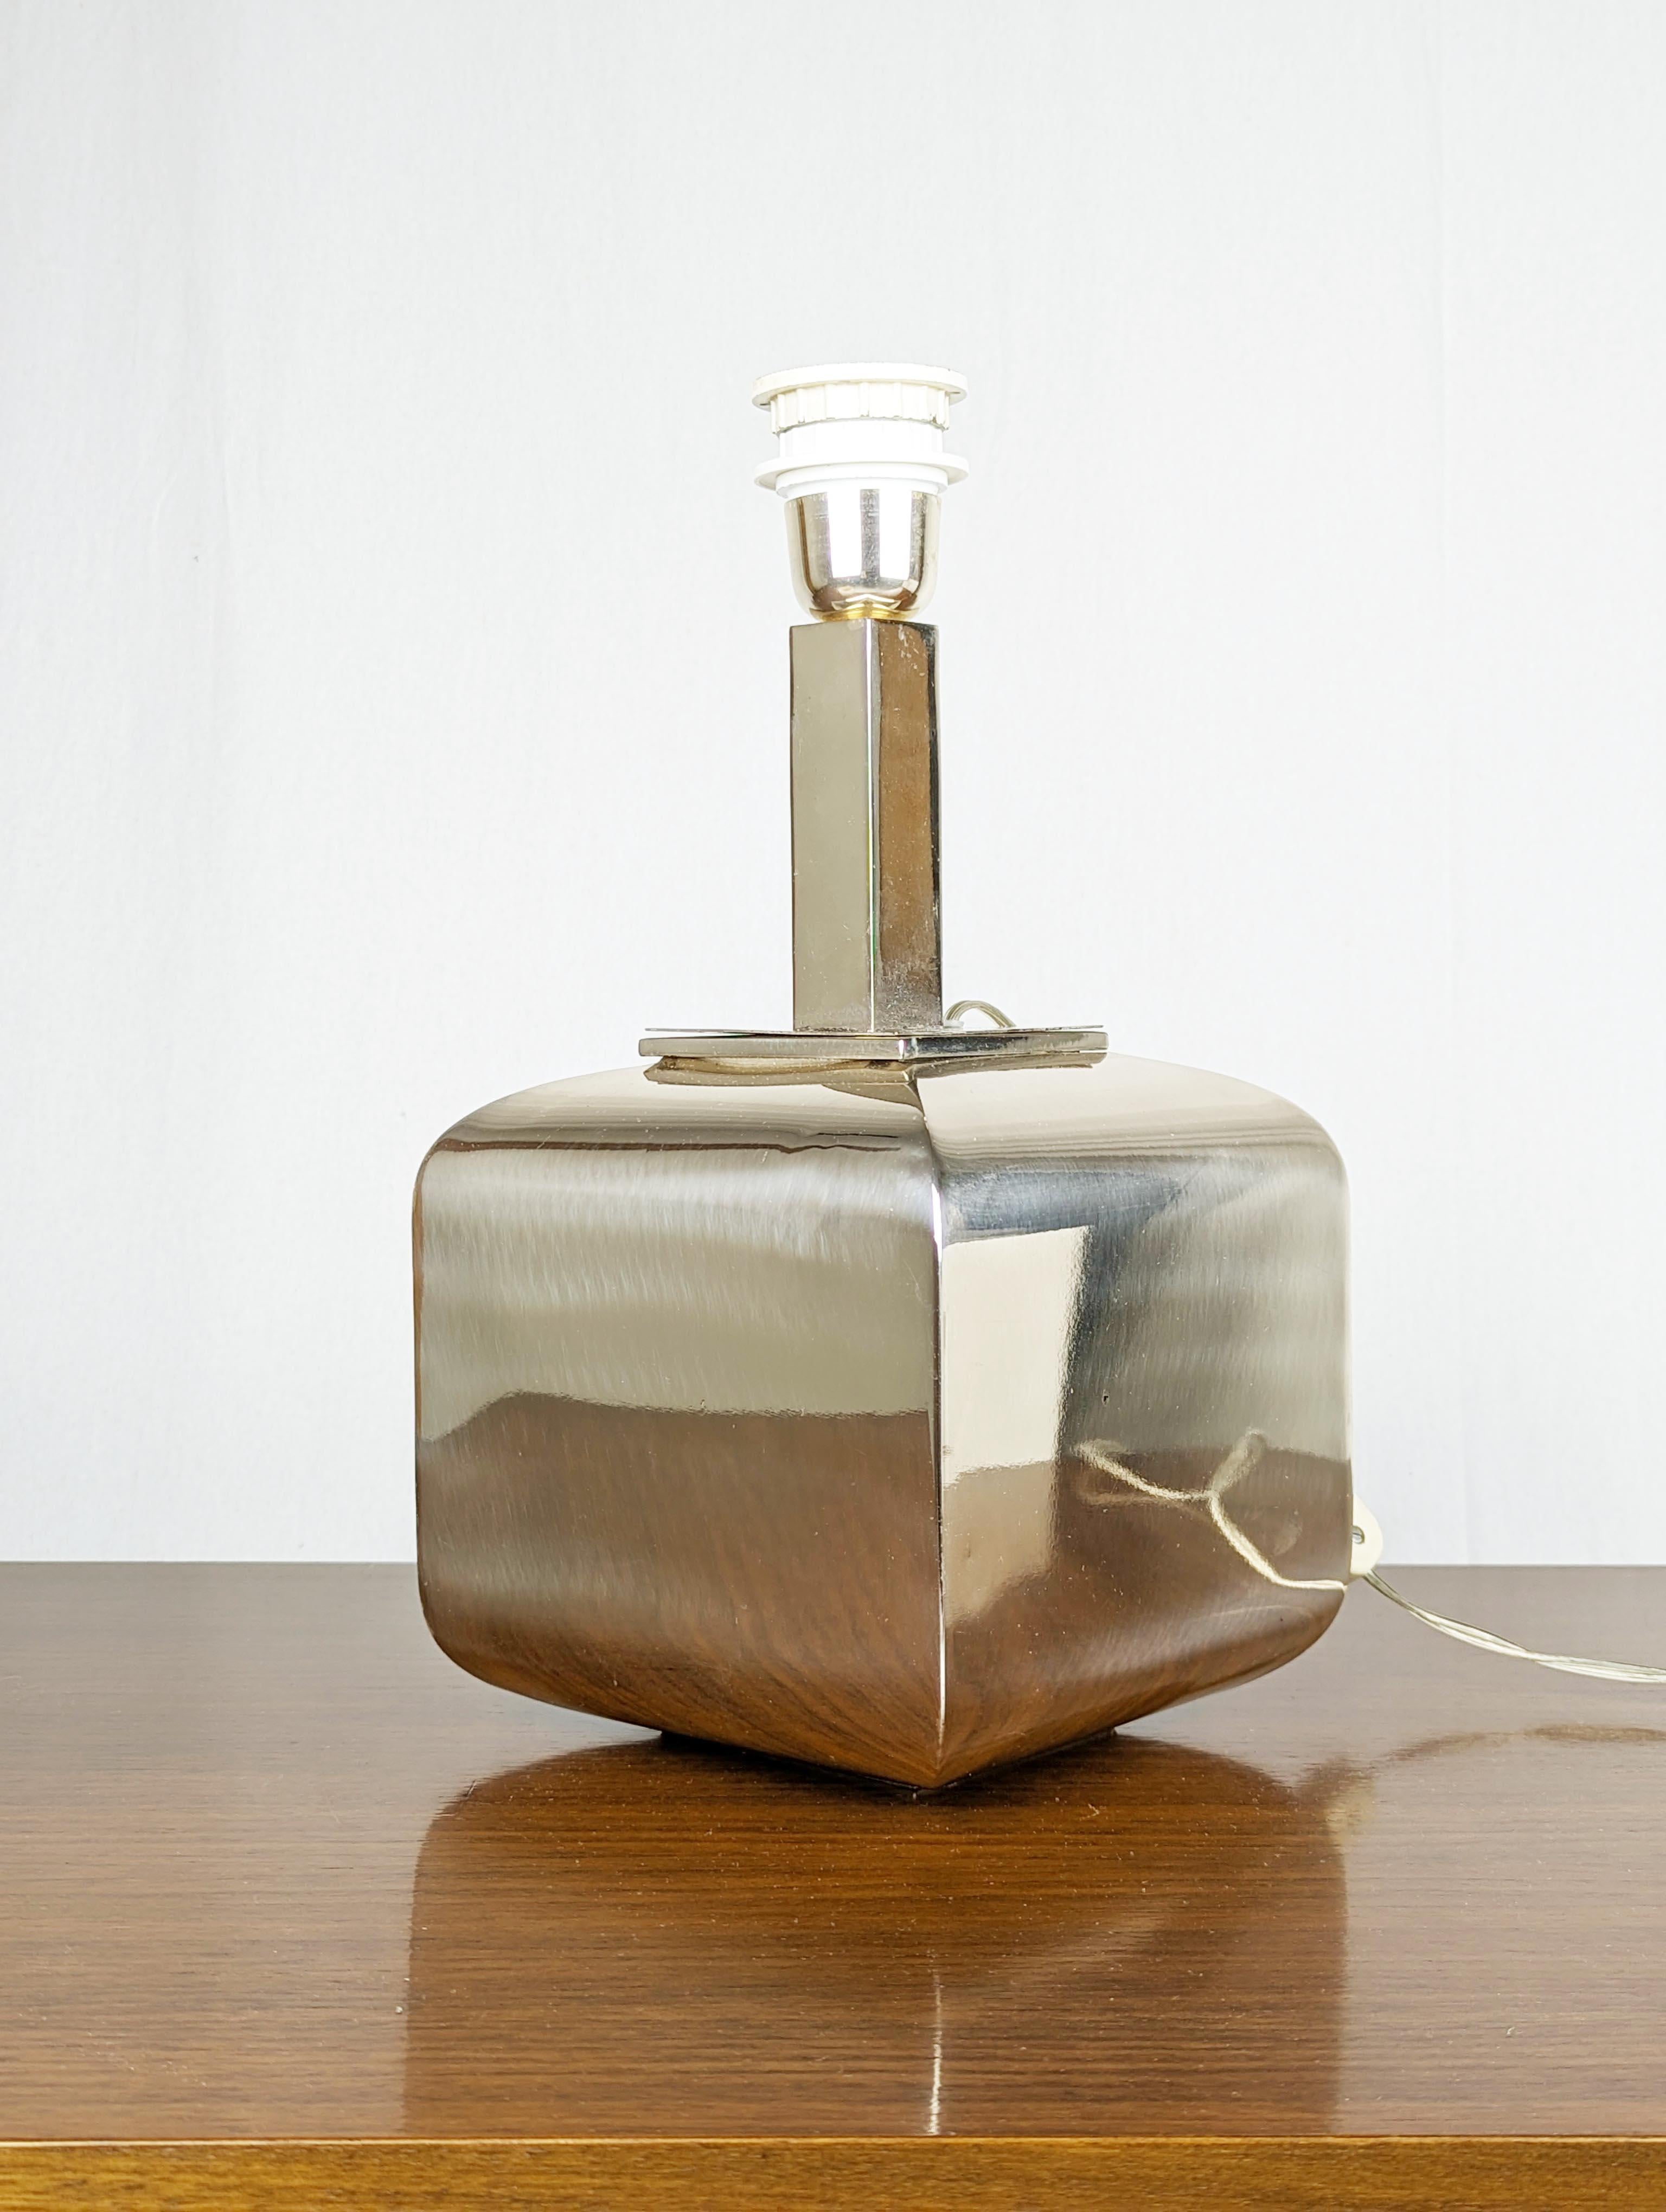 Elegant table lamp in silver metal designed and made in Italy by Nella Longari, a well-known Milanese antique dealer, decorator and designer from the 1970s. The refined production of Nella Longari is characterized by the choice of fine materials and